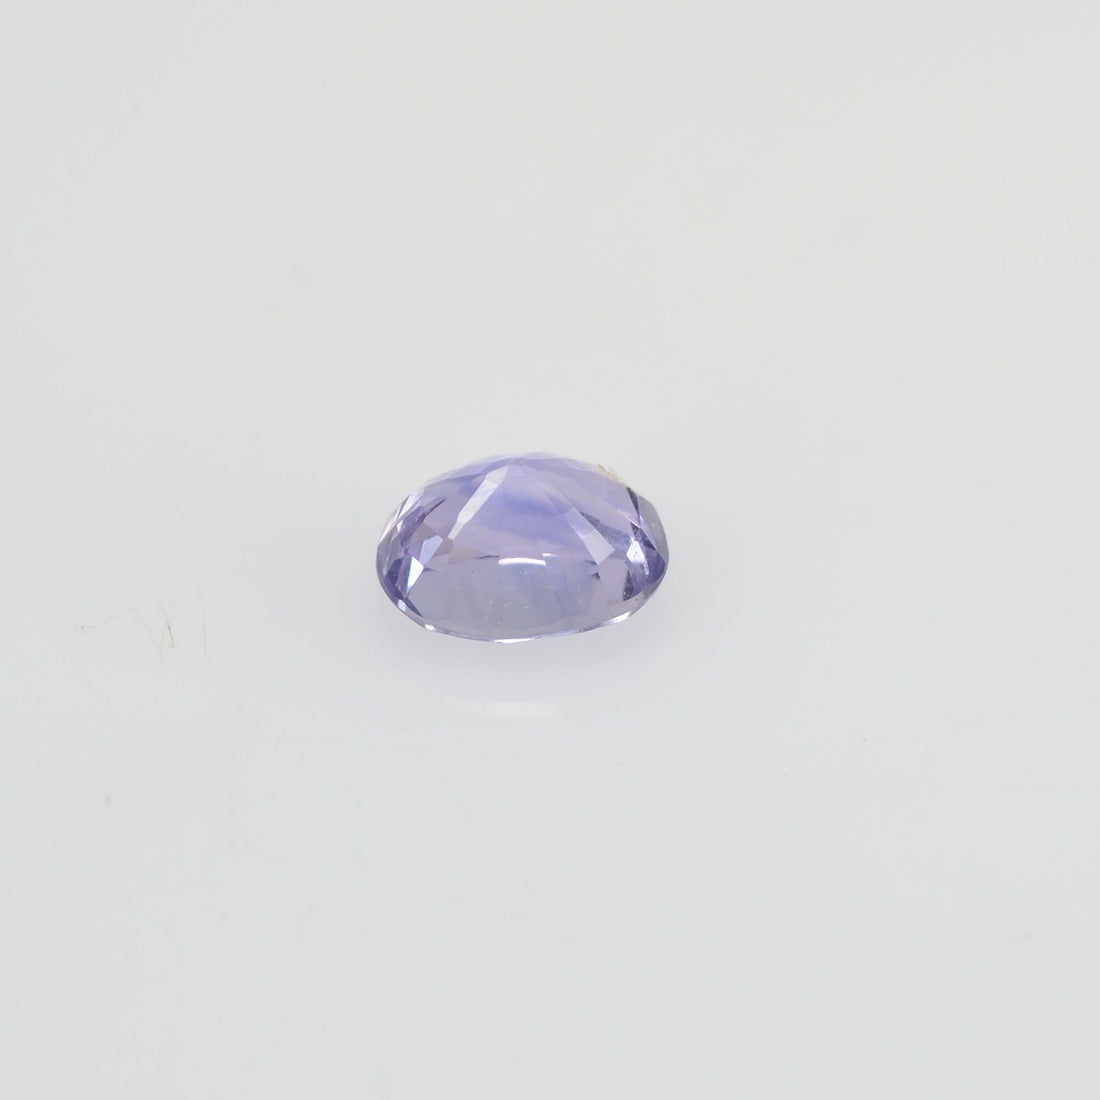 0.26 cts Natural Purple Sapphire Loose Gemstone Oval Cut